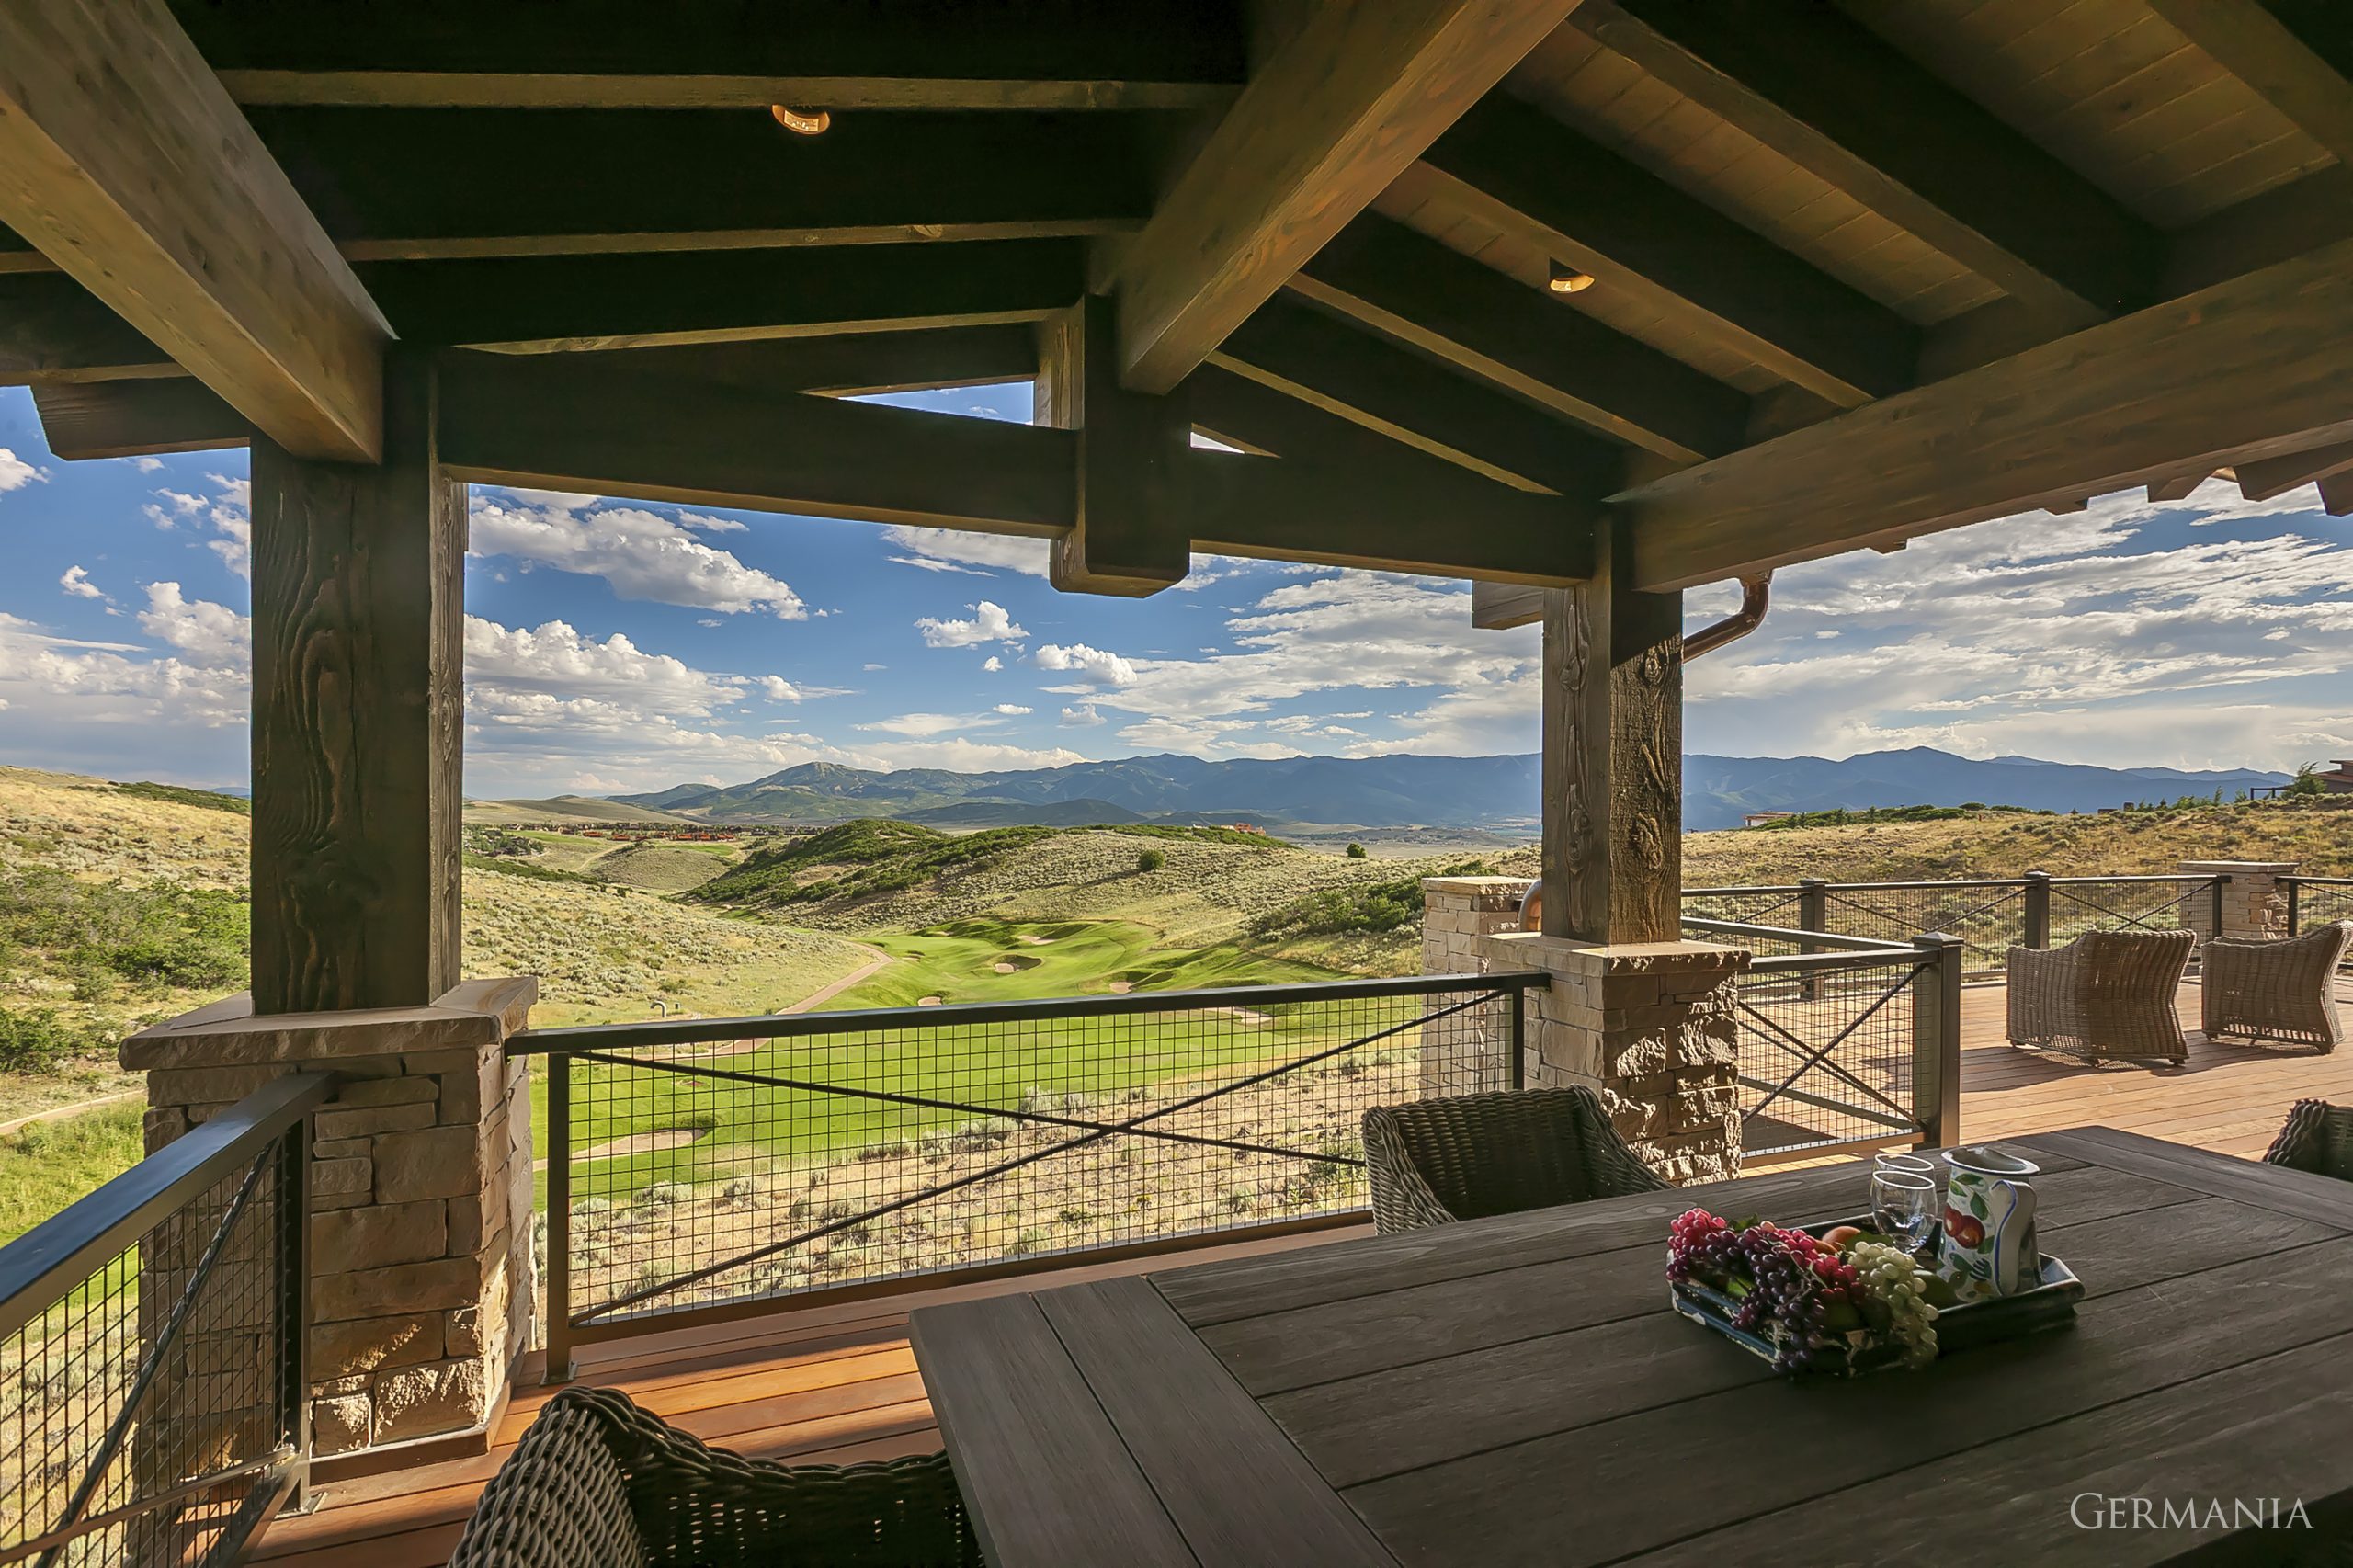 In all our custom luxury homes, we make sure we value every element and aspect of luxury living. Outside decks with custom railings and beams enhance that mountain home living experience.